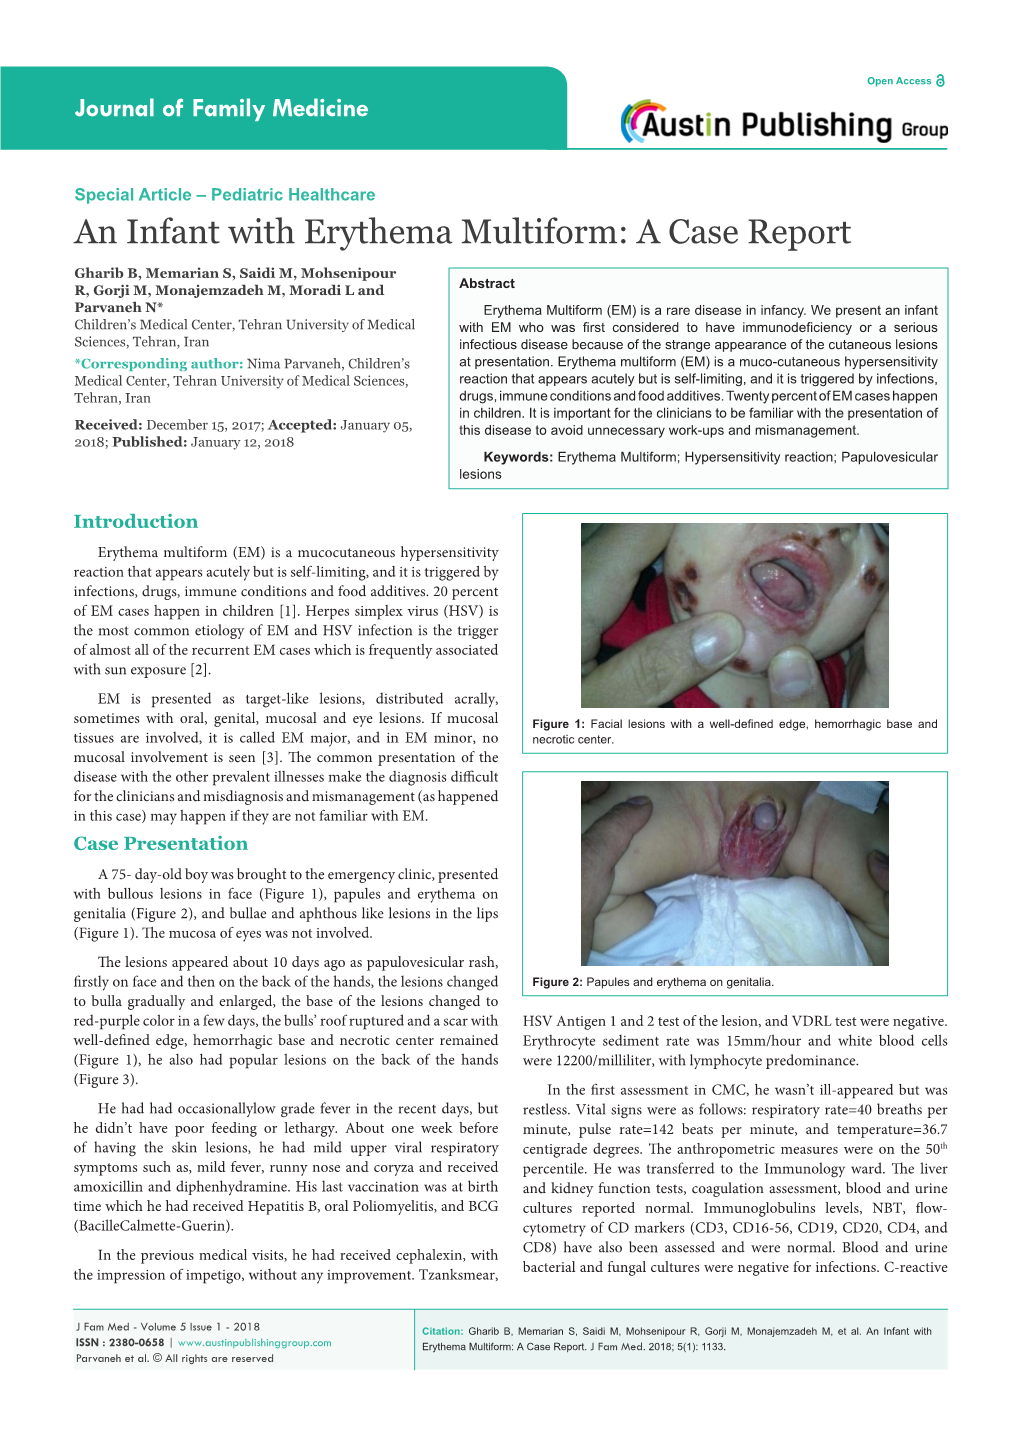 An Infant with Erythema Multiform: a Case Report